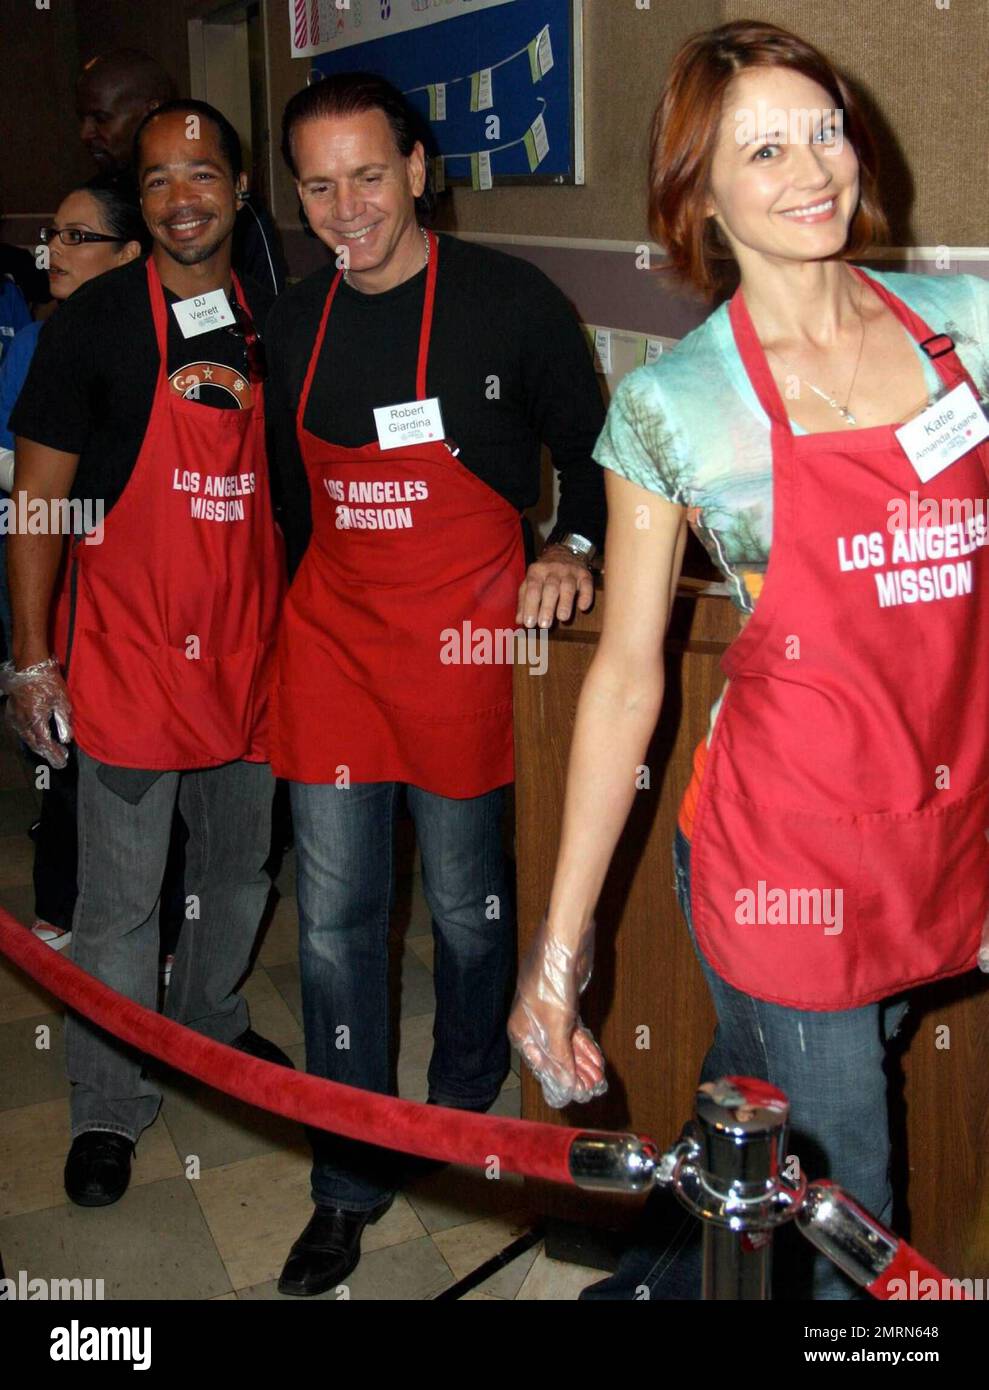 Robert Giardina, DJ Verrett and Katie Amanda Keane participate in the Los Angeles Mission Good Friday Event that features hundreds of volunteers serving the homeless. The event also included a foot washing tent and a shoe fitting area. Los Angeles, CA. 4/10/09.   .  . Stock Photo